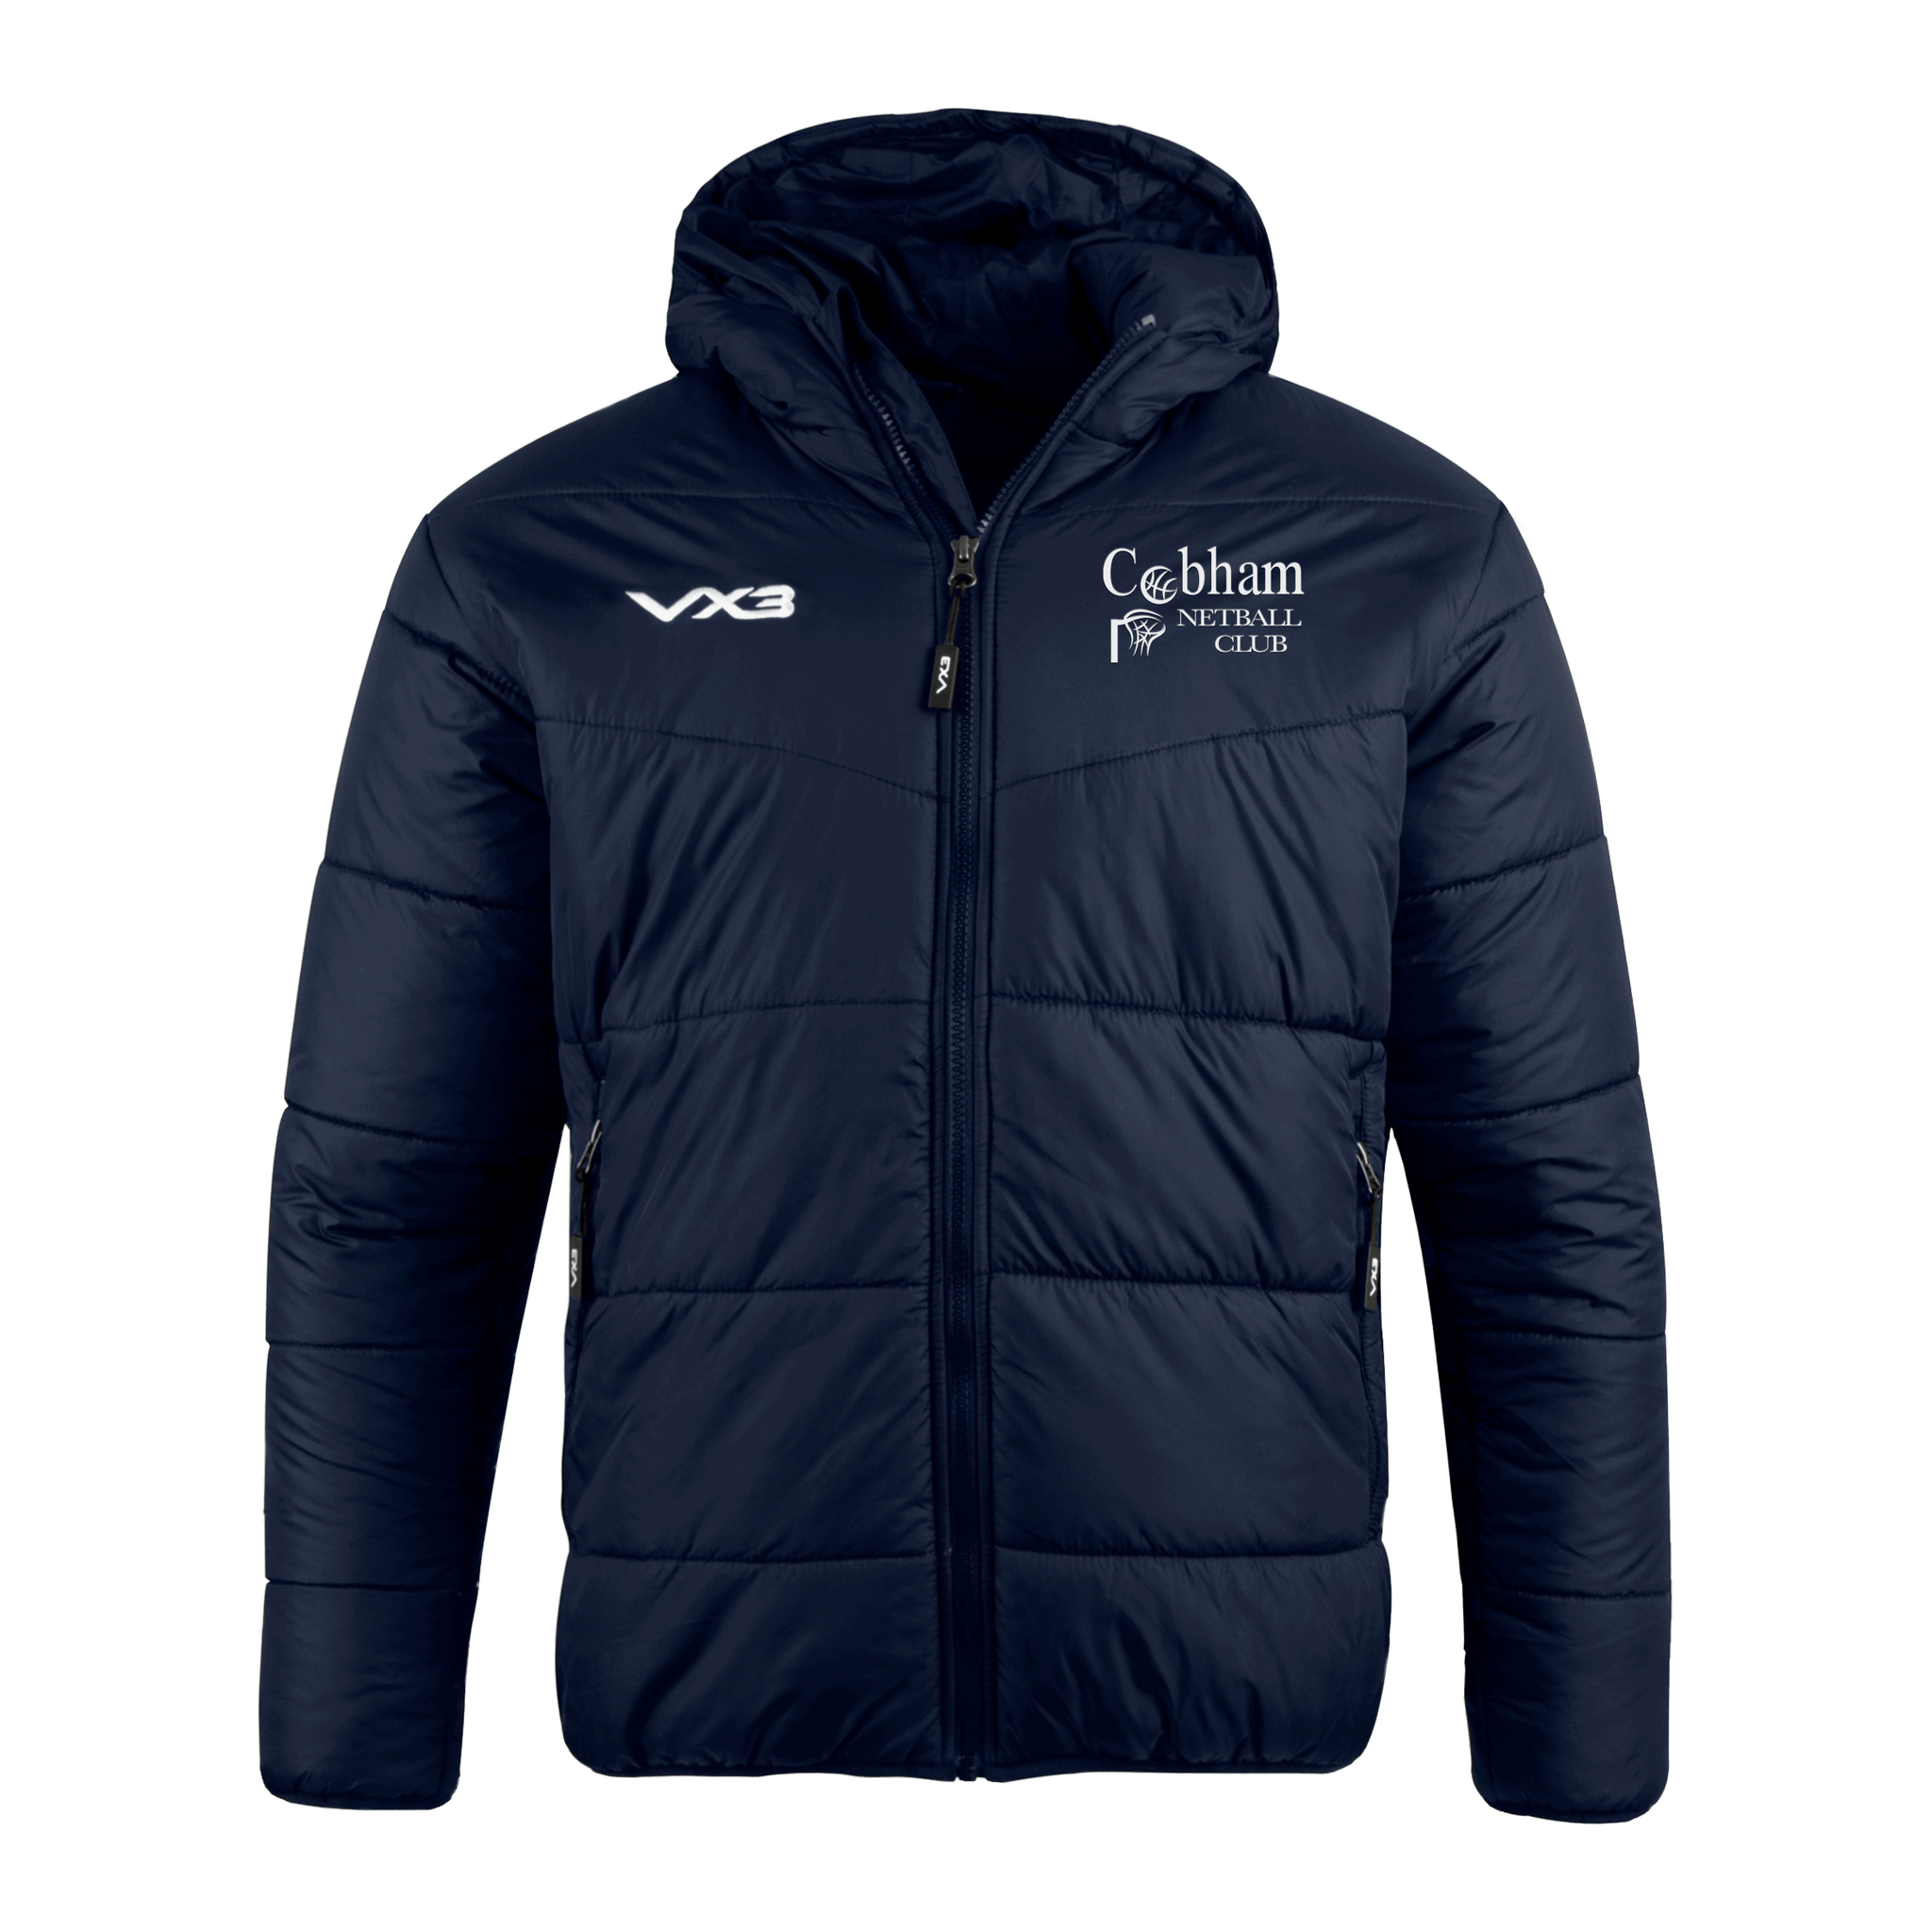 Cobham Netball Club Lorica Youth Quilted Jacket